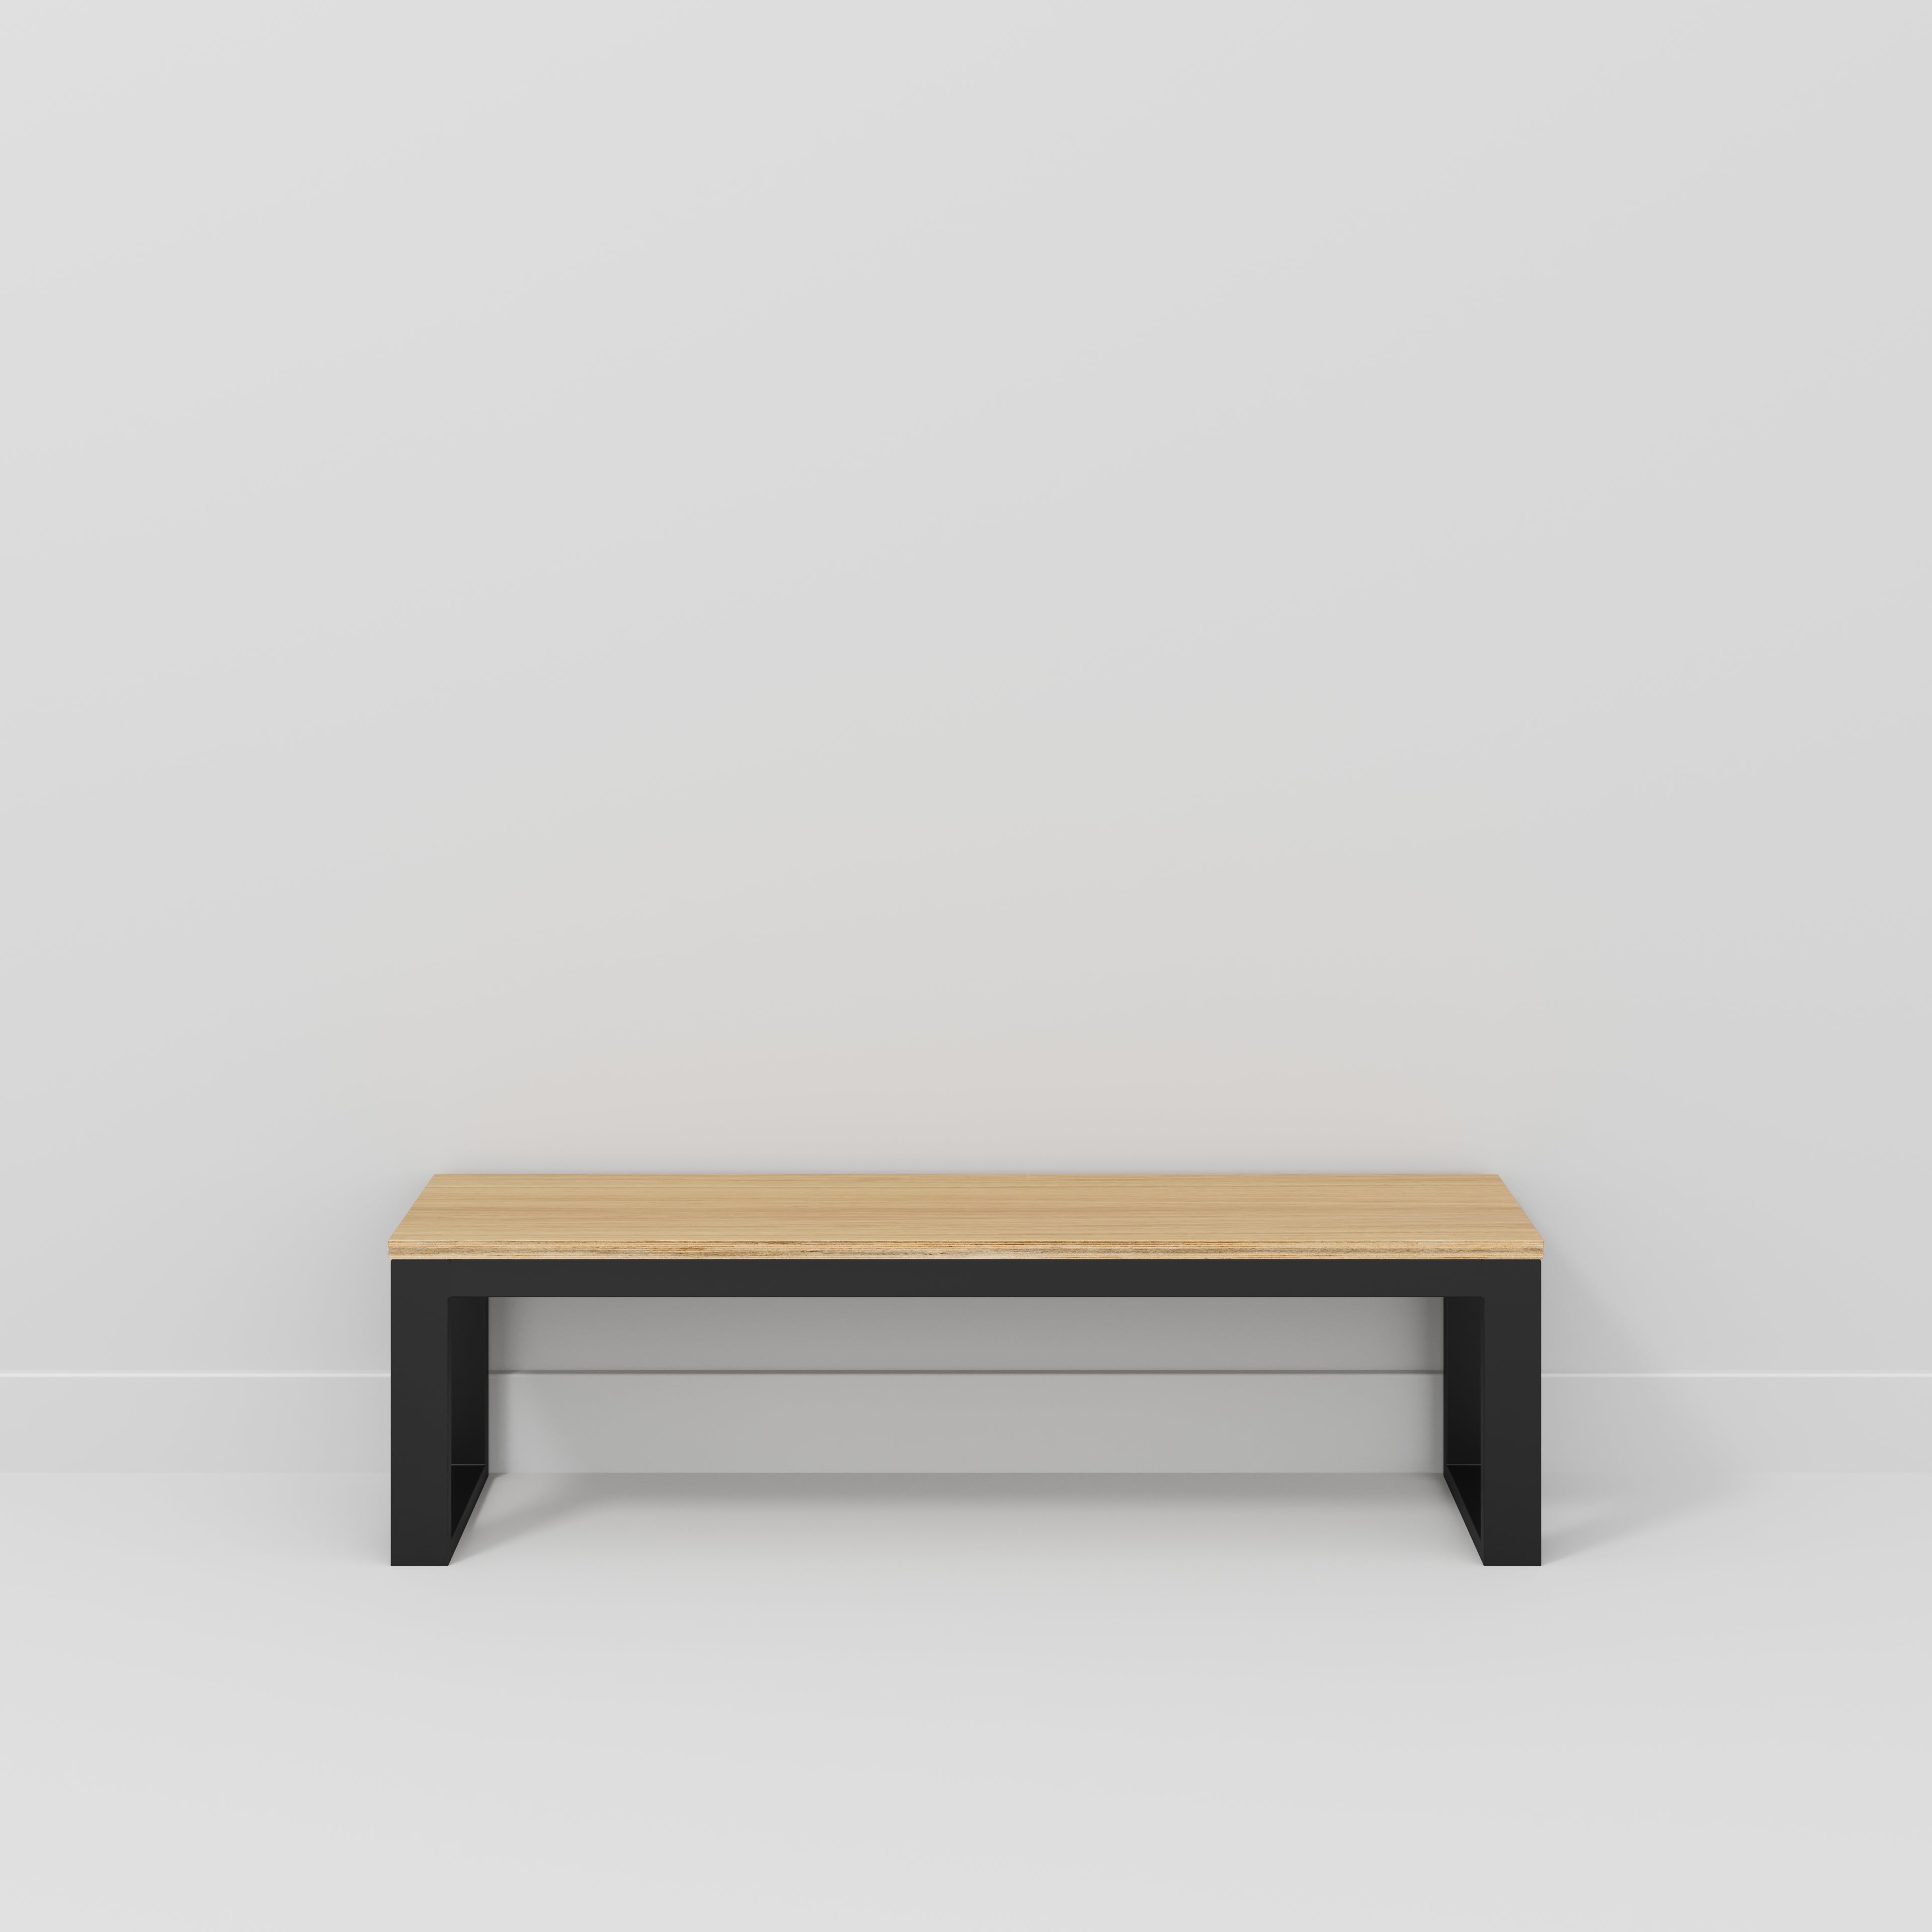 Bench Seat with Black Industrial Frame - Plywood Oak - 1500(w) x 325(d)